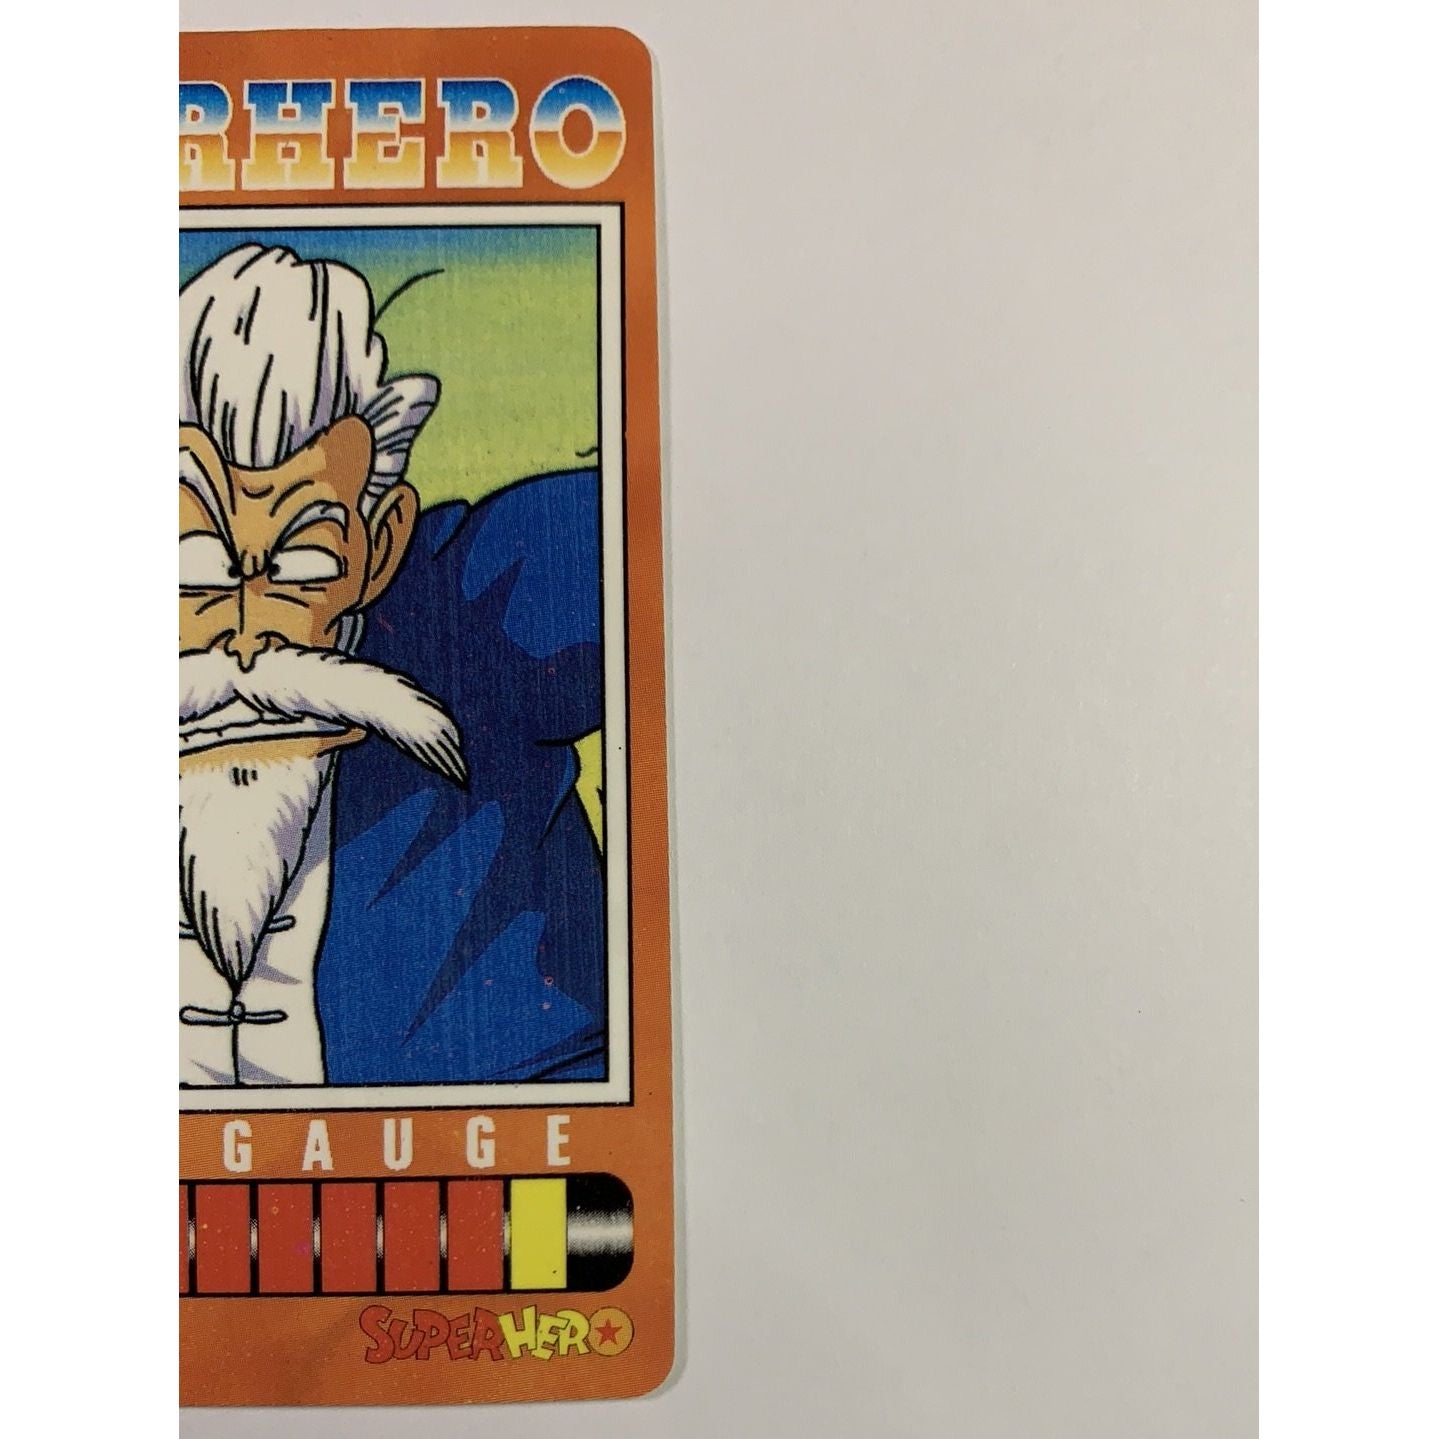  1995 Cardass Adali Super Hero Special Card S-89 Silver Foil Master Roshi Works on His Kicks  Local Legends Cards & Collectibles